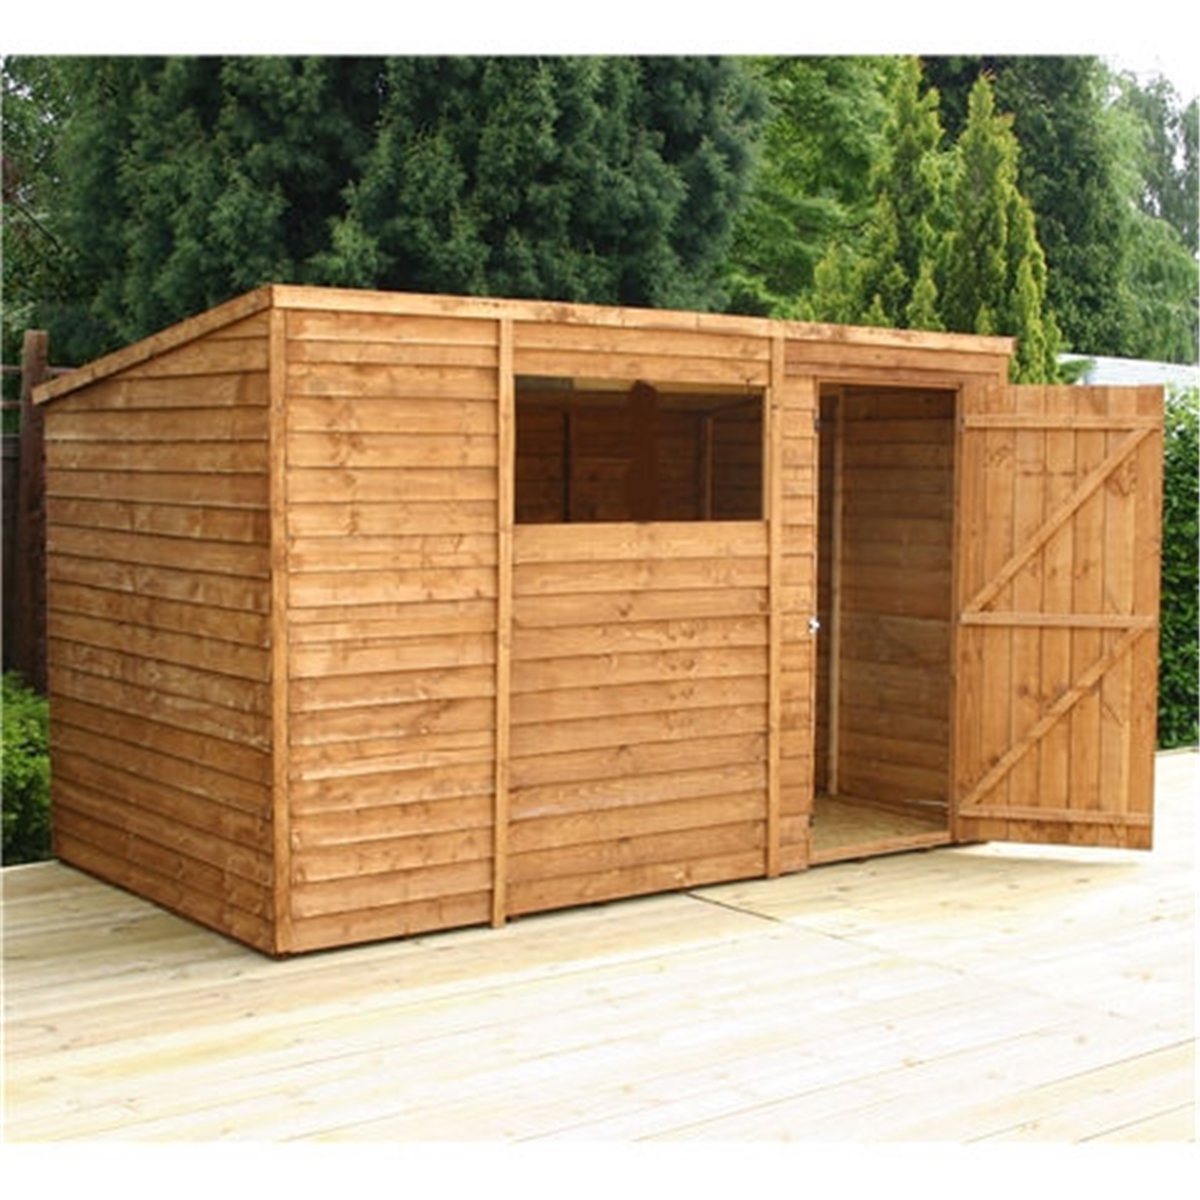 mccarte: Strong wooden sheds